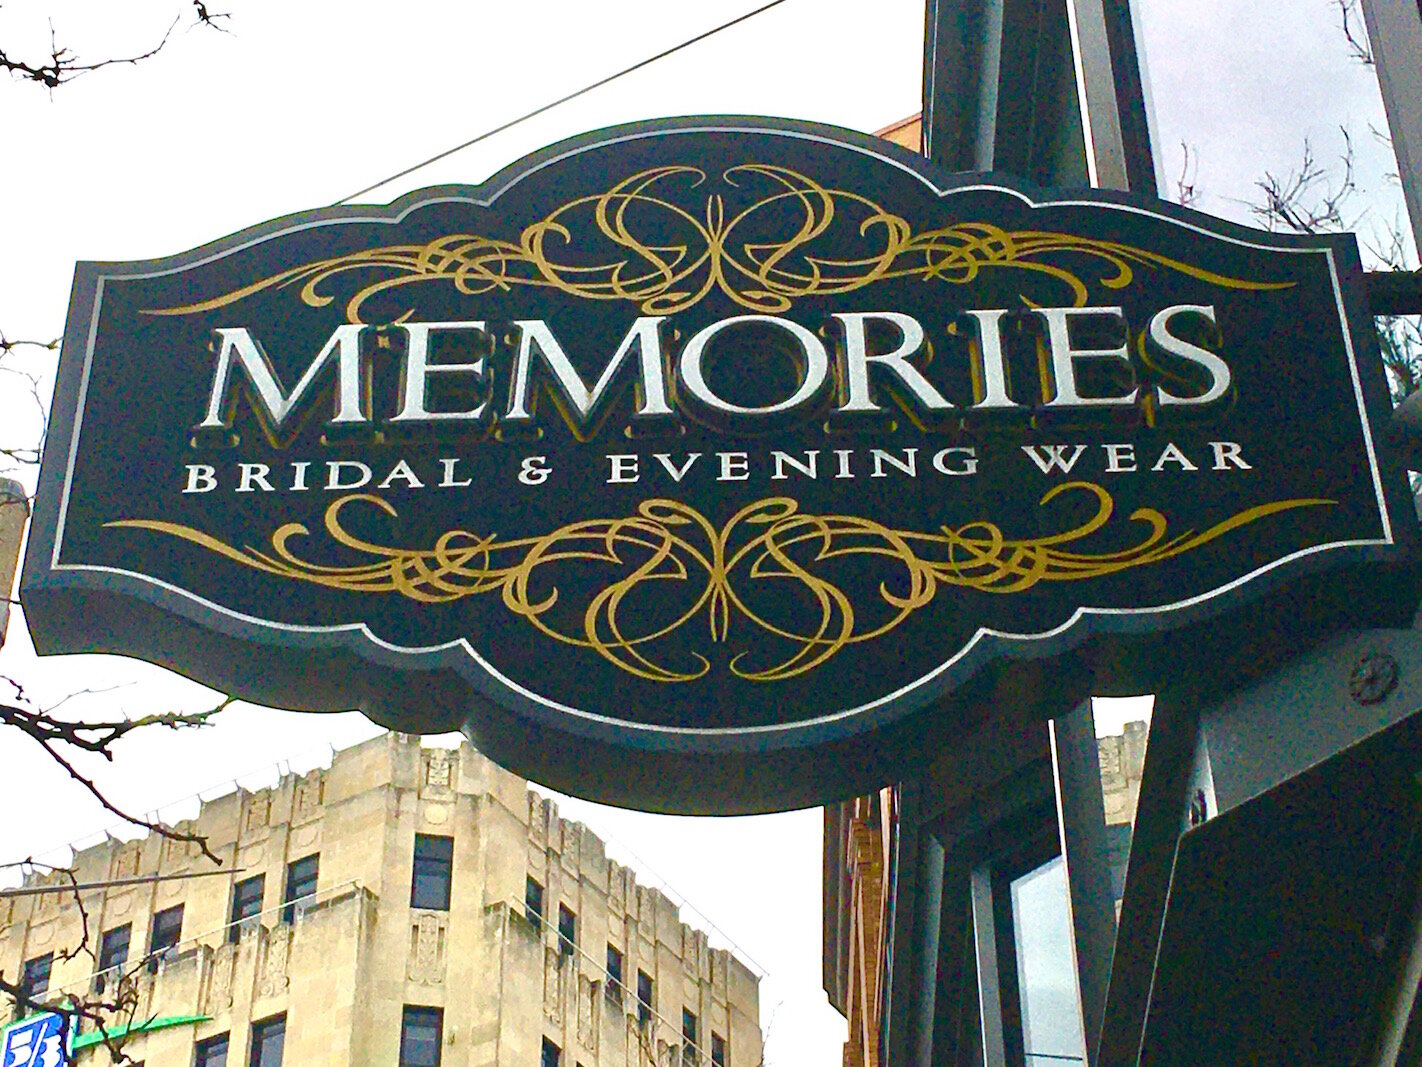 Memories Bridal & Evening Wear is a 17-year-old business located at 203 E. Michigan Ave. In downtown Kalamazoo.